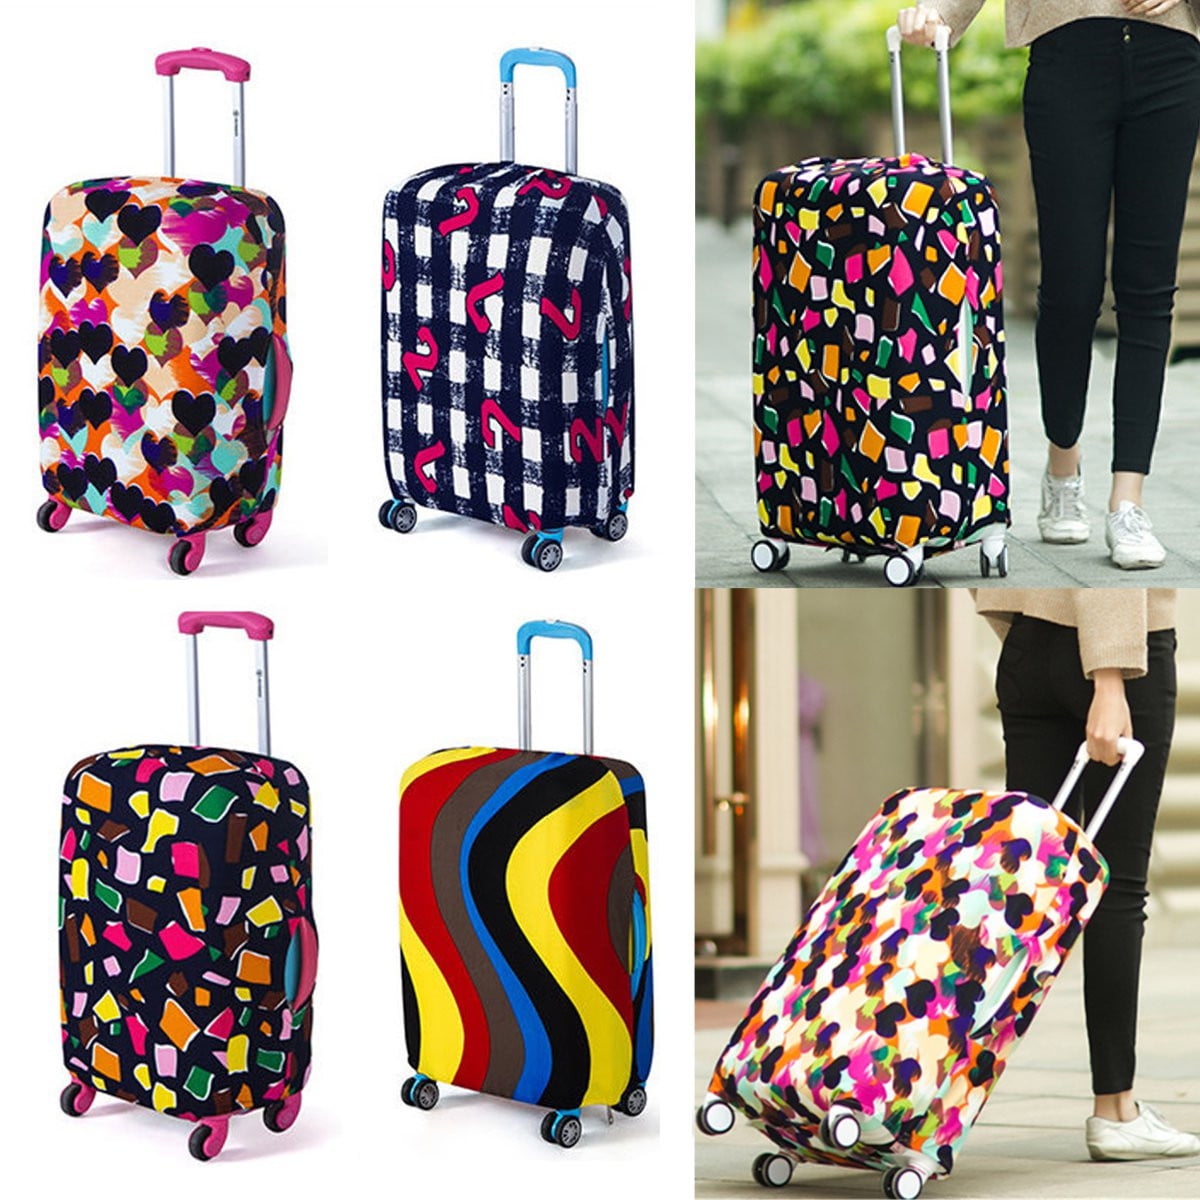 Travel Elastic Spandex Suitcase Protector with Luggage Tag Fits 19 to 20 Inch Galaxy Luggage Cover THome Protective Washable Suitcase Cover 